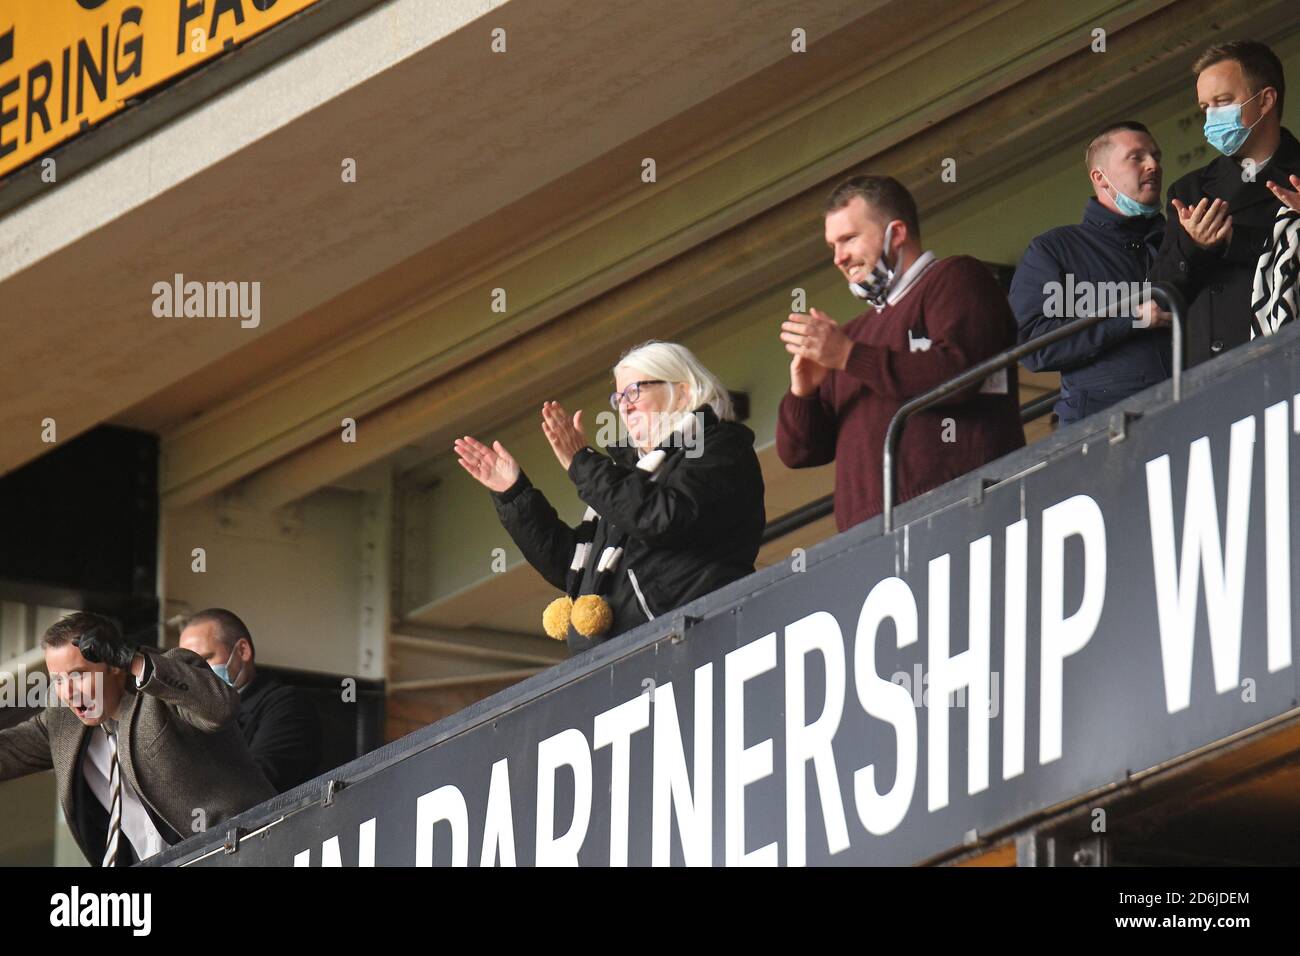 Burslem, Staffordshire, UK. 17th October, 2020. Port Vale Chairman Carol Ann Shanahan OBE applauds the Port Vale team from the pitch after their 1- victory over Salford City in League 2. Carol watch the game from the directors box and the game was played behind closed doors due to the coronavirus pandemic. Stock Photo